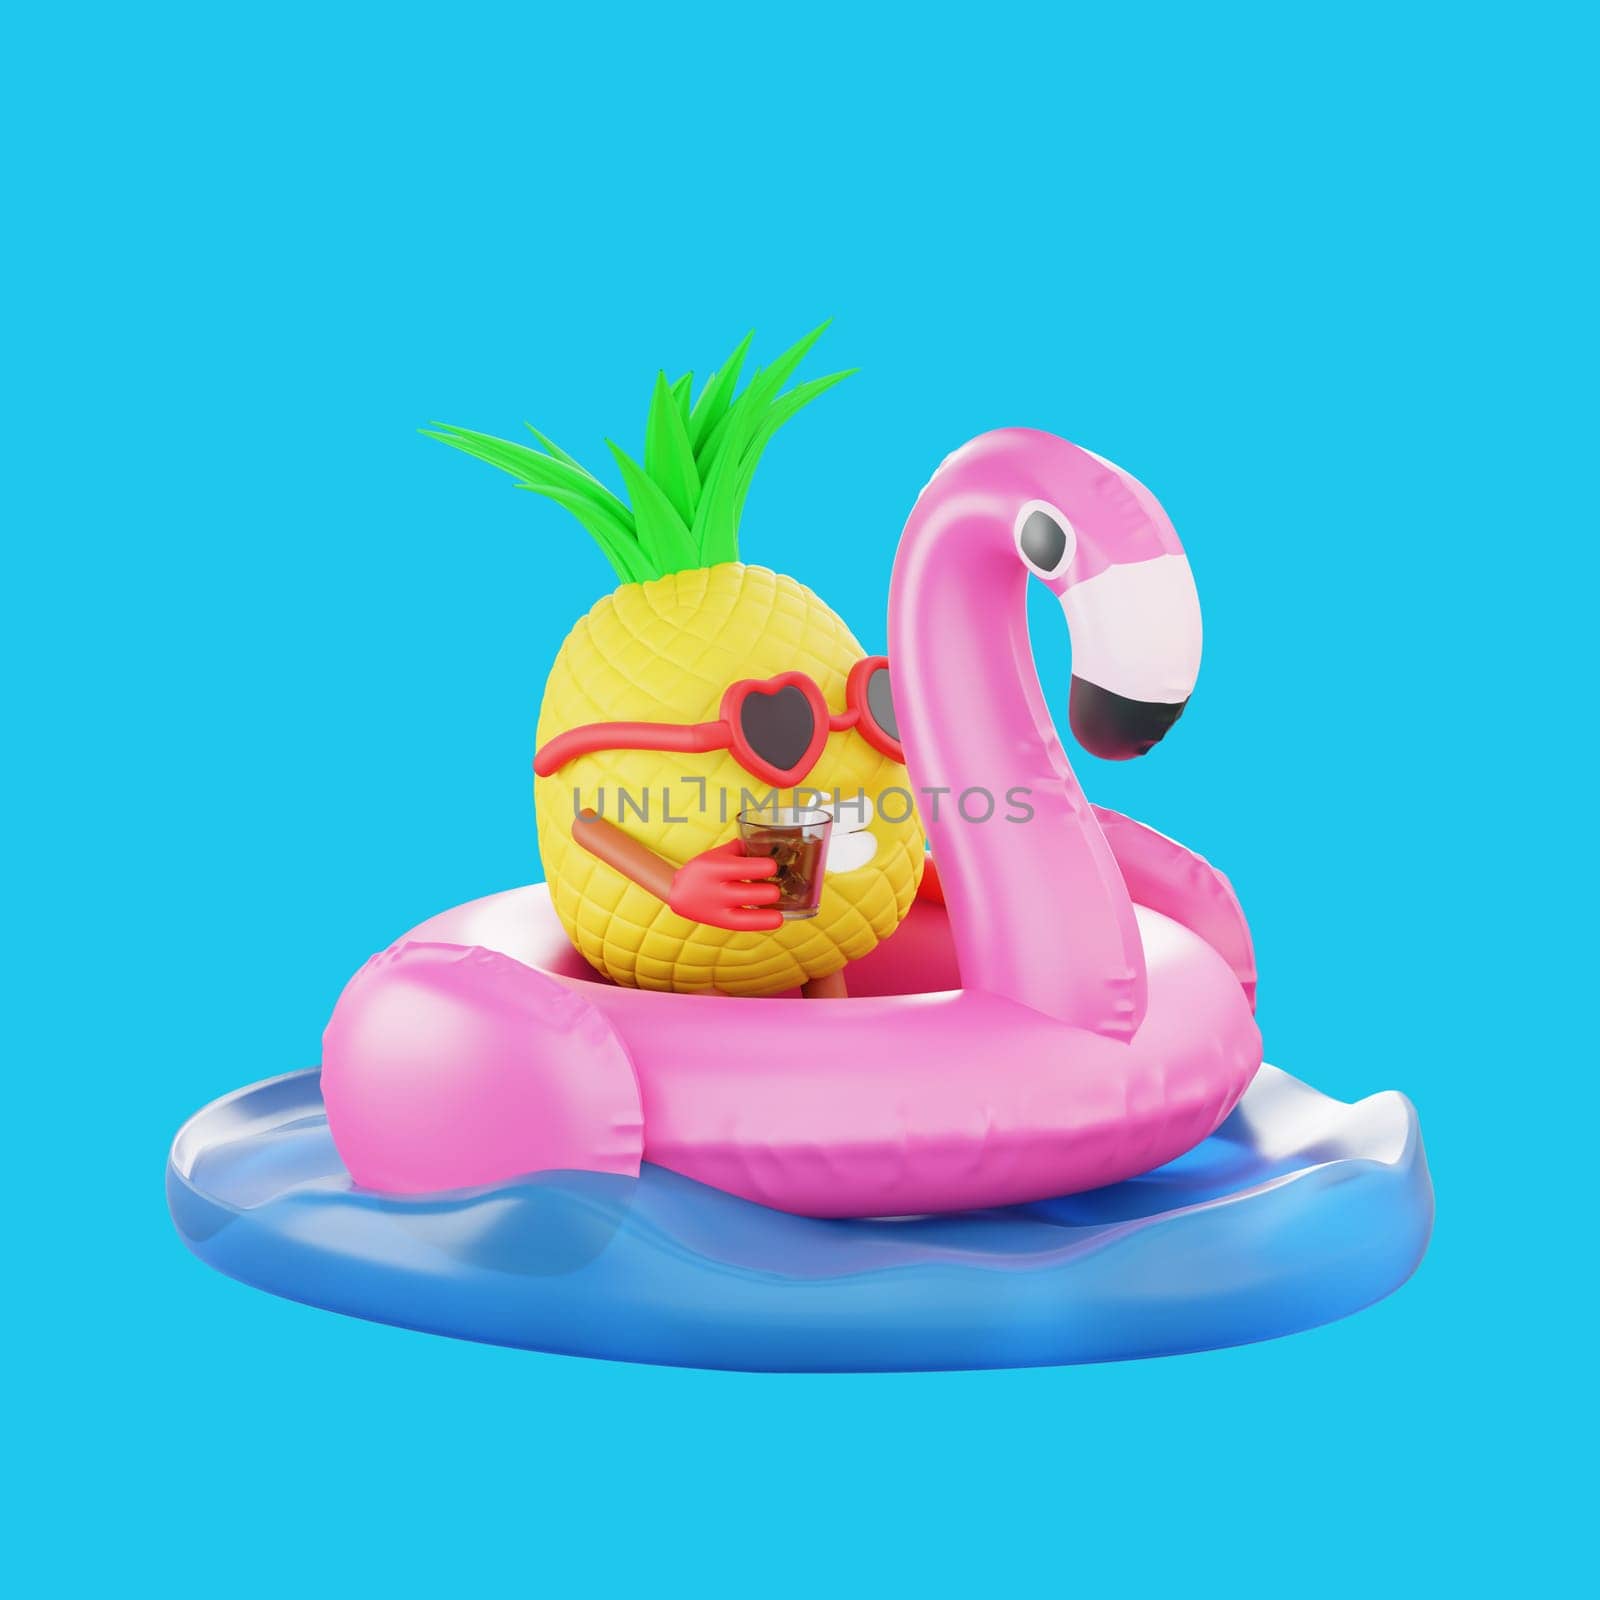 3D render design of a cute pineapple character for summer vacation by Rahmat_Djayusman